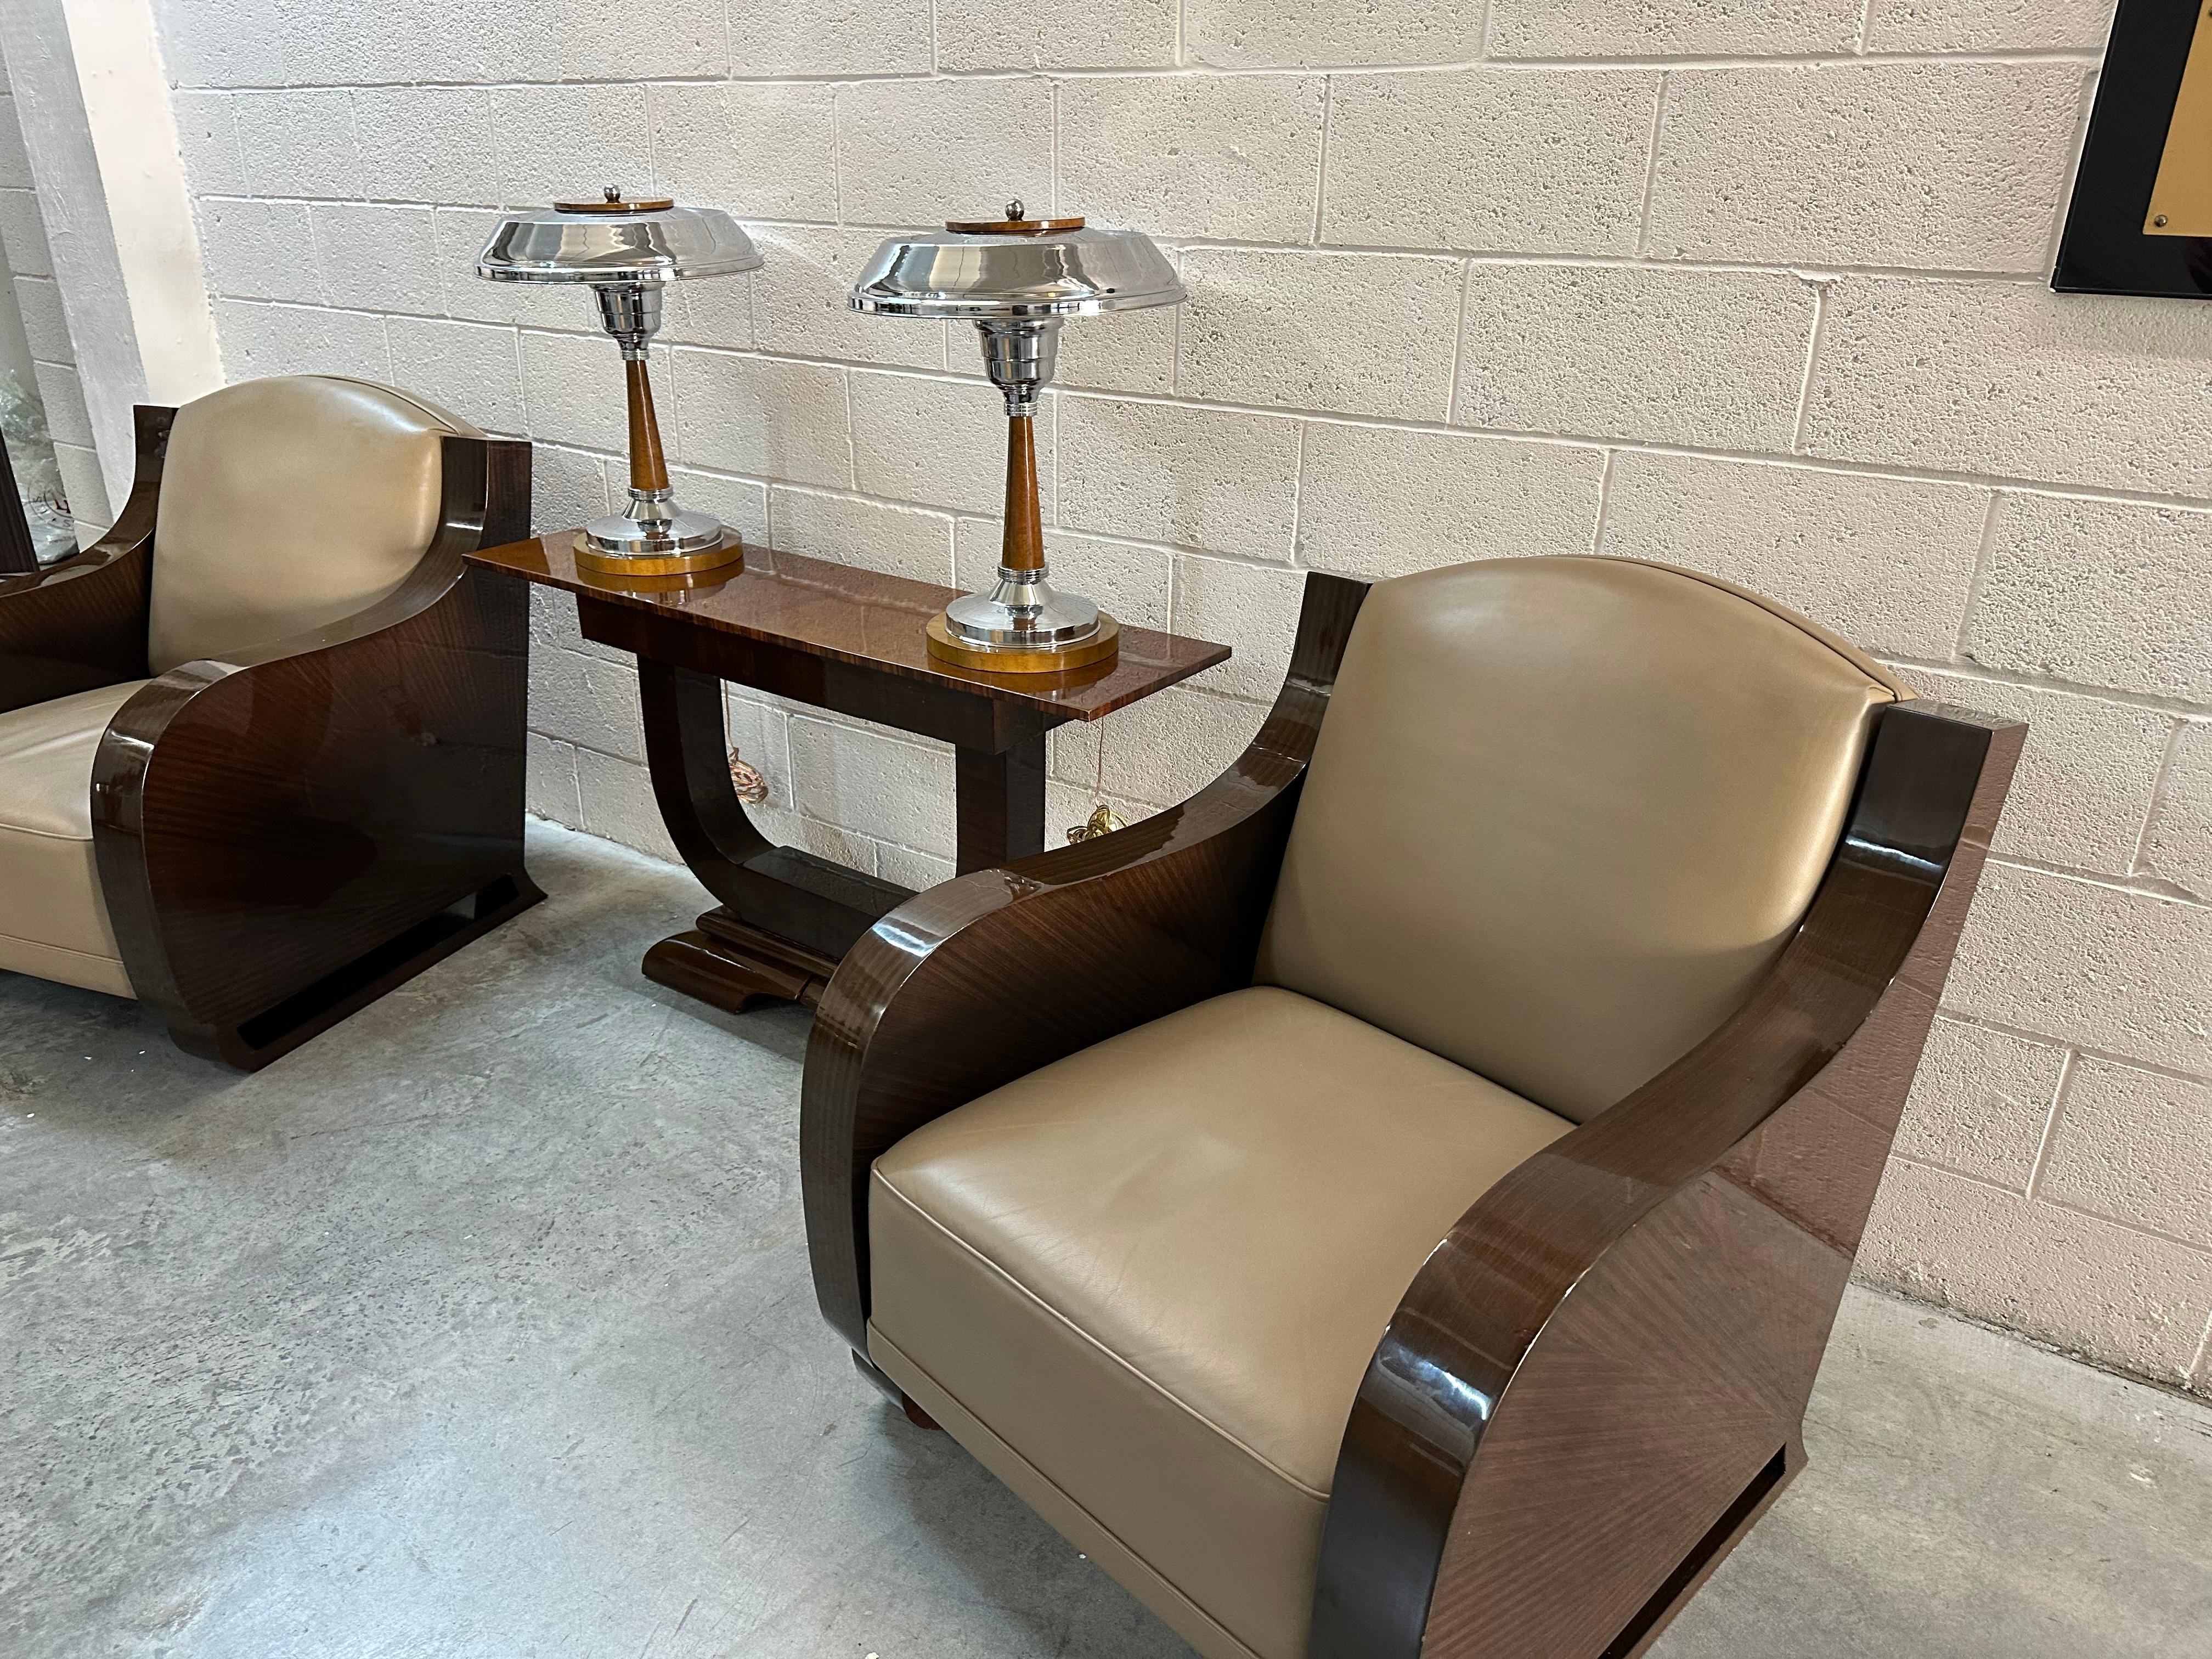 Pair of Art Deco Table Lamps in wood and chrome, 1920, France For Sale 8